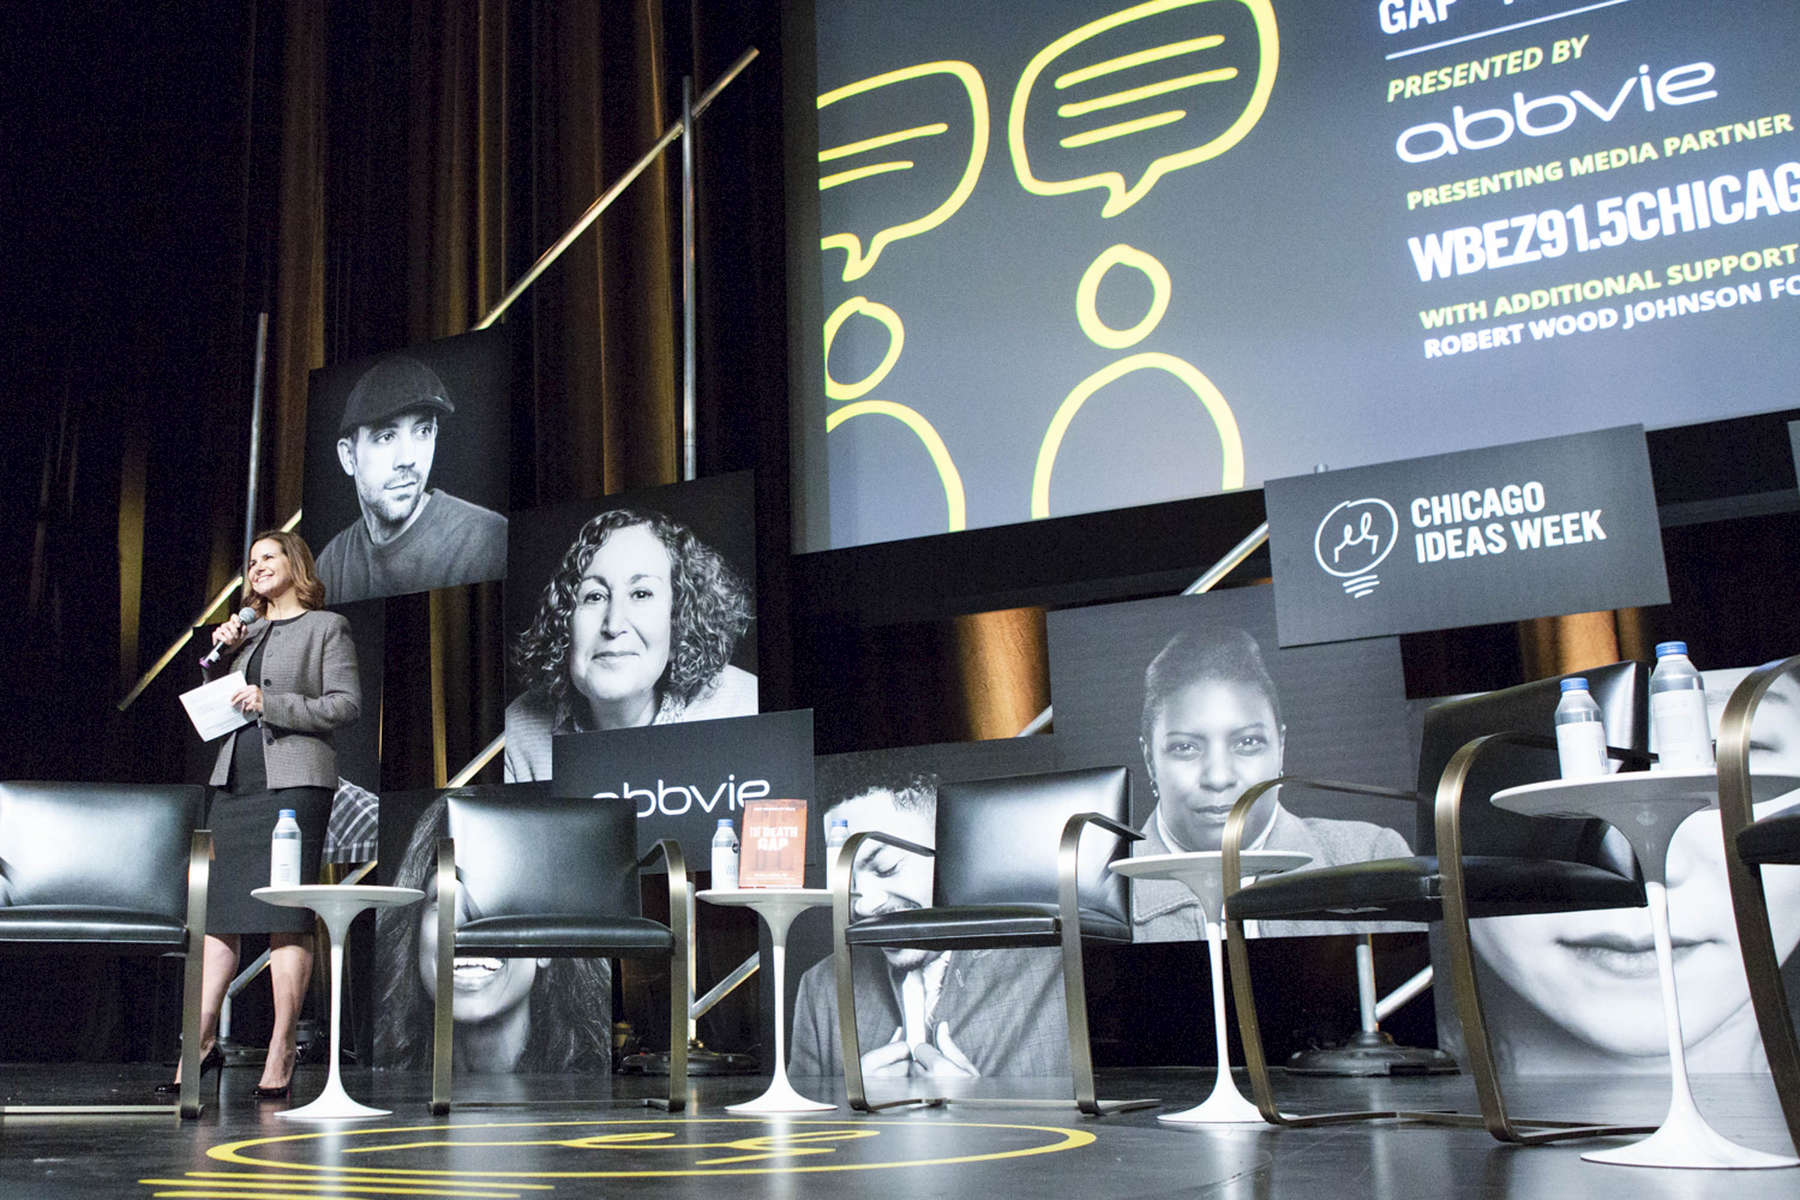 CHICAGO, IL - OCTOBER 15: Tracie Haas, of AbbVie, makes the Sponsorship opening remarks and before Chicago Ideas Week panel discussion, “2 Miles, 16 Years: Chicago's ‘Death Gap’ is a Crisis” (Photo by Beth Rooney/Chicago Ideas Week)